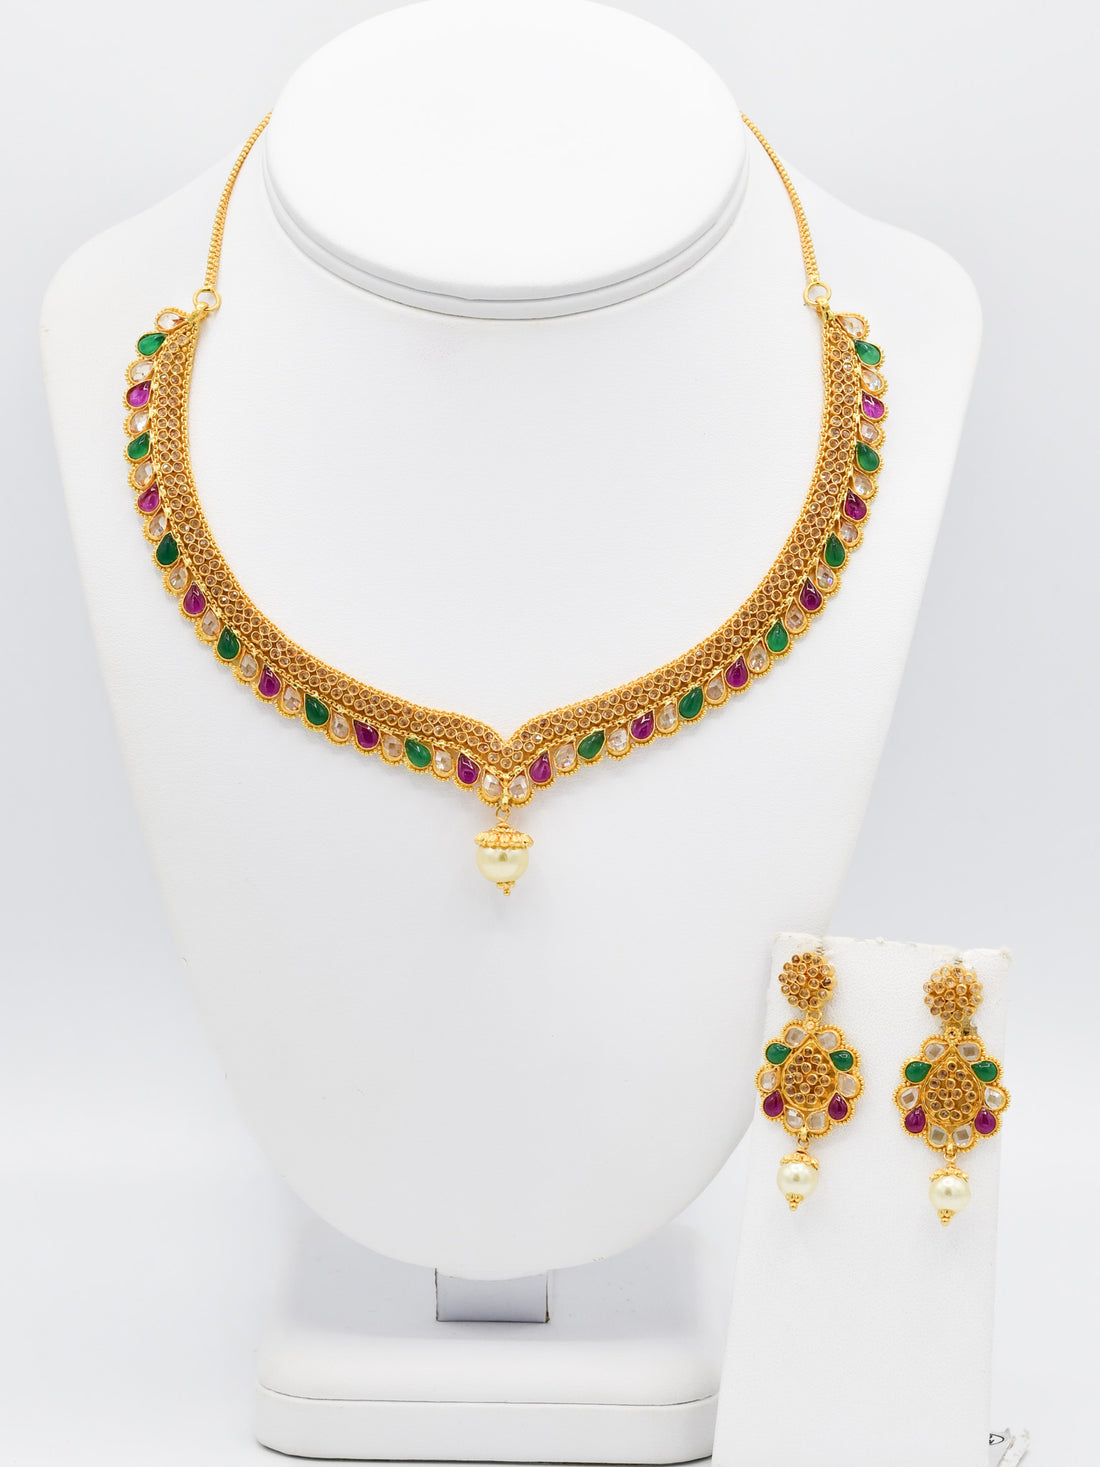 22ct Gold Multi CZ Necklace Set - Roop Darshan